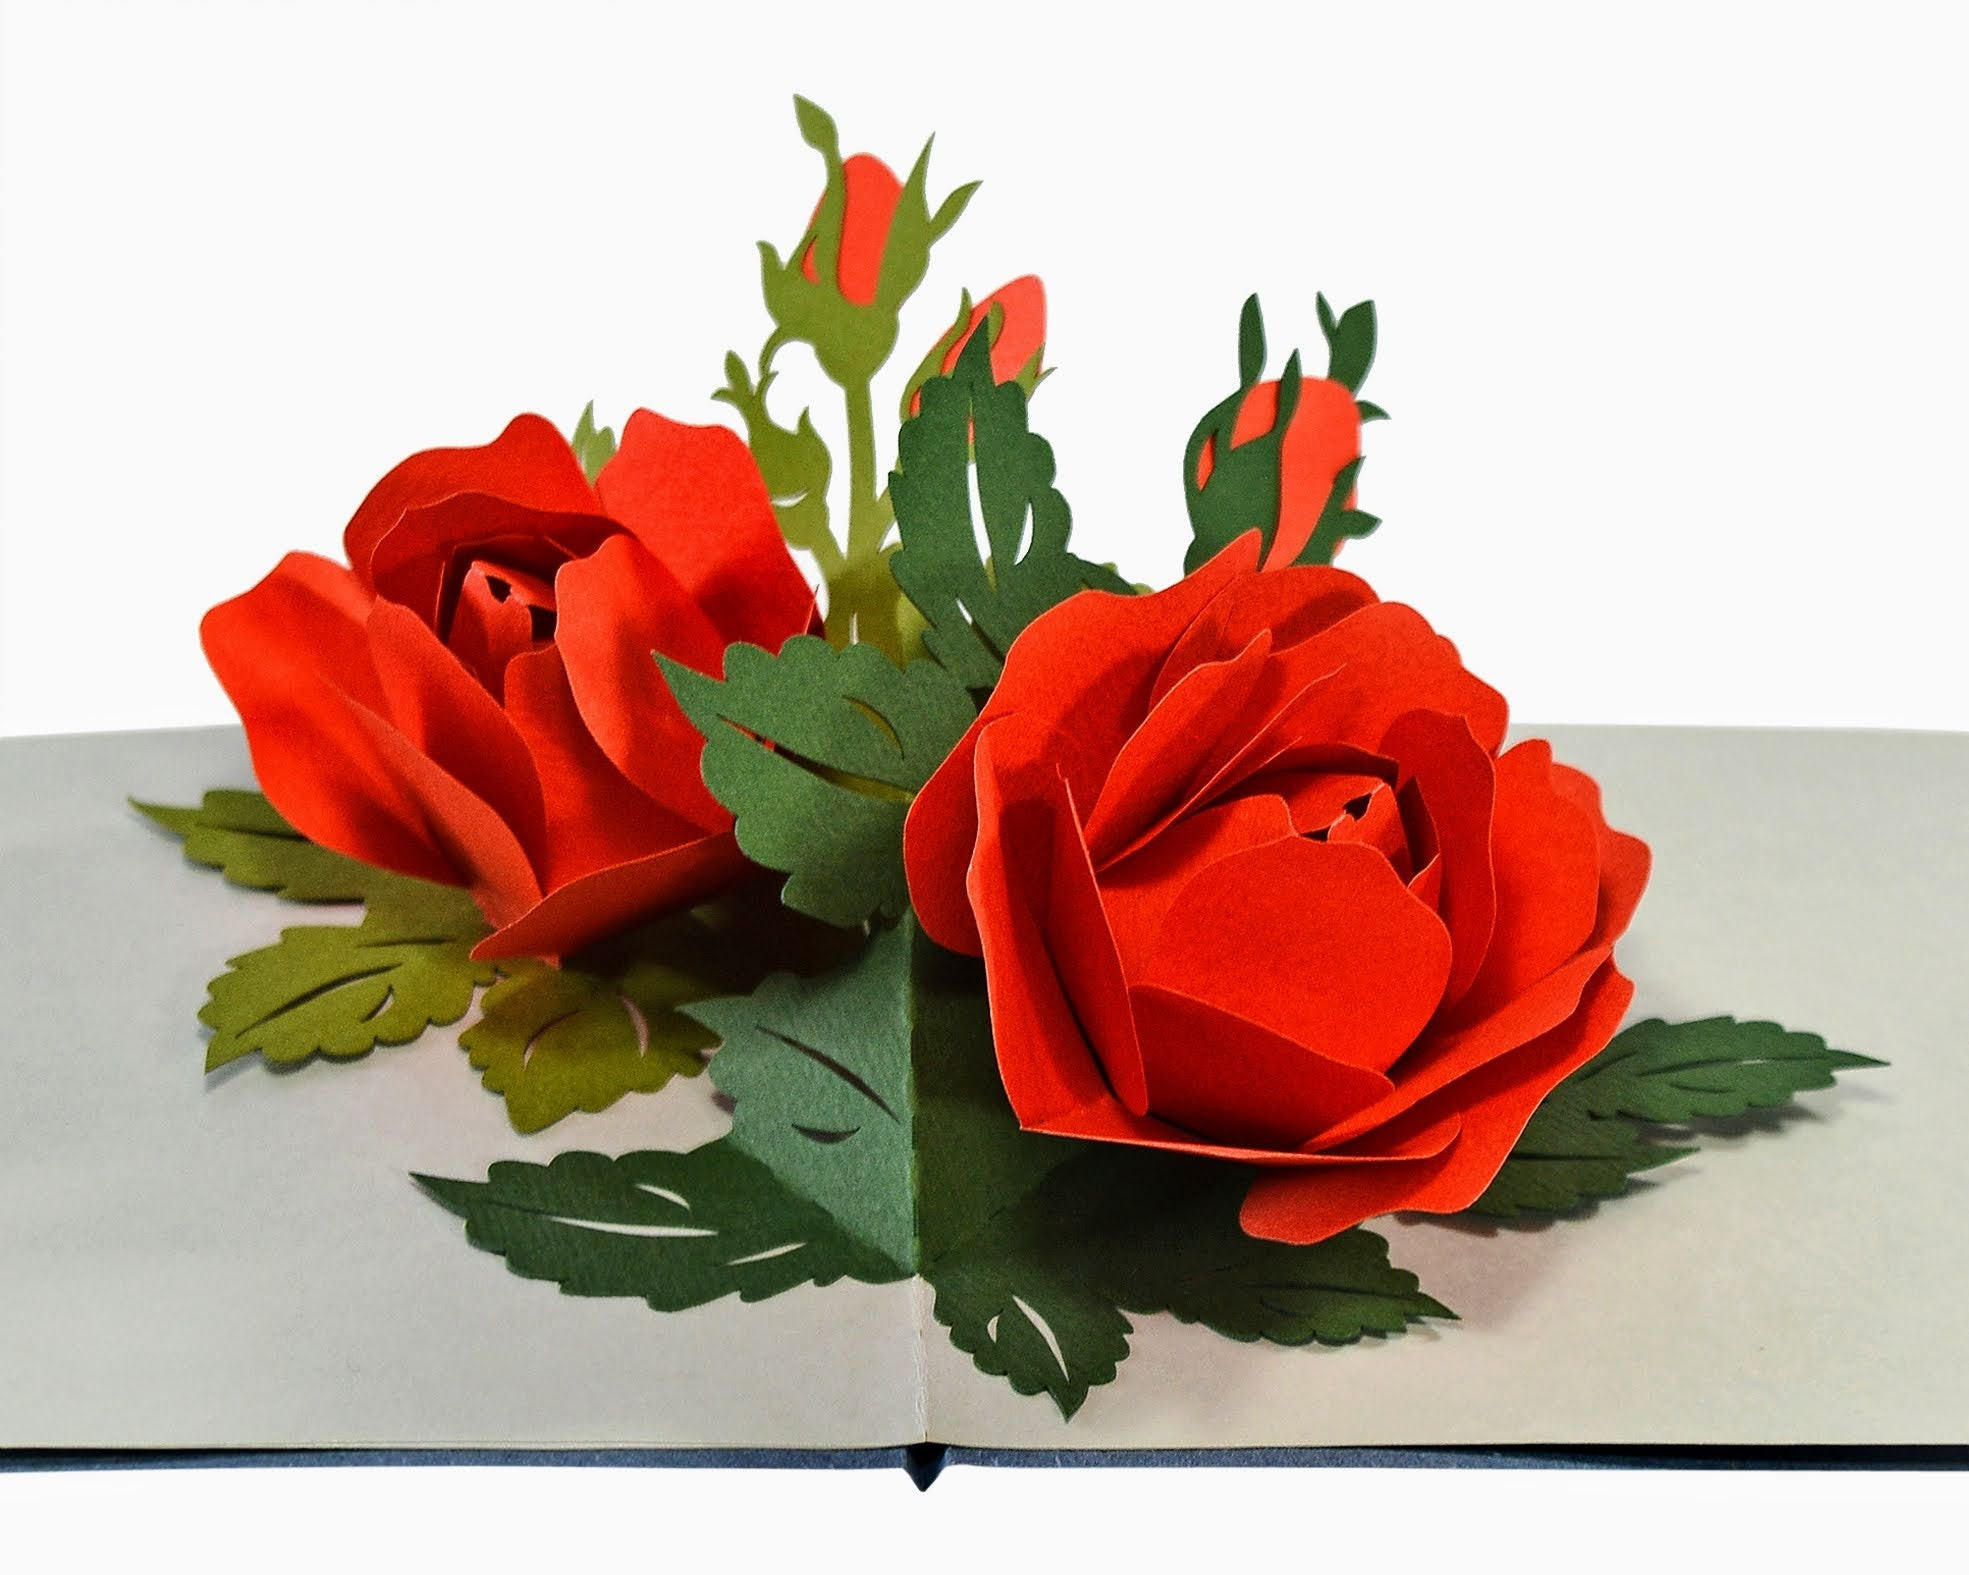 Blooming Red Roses 3D Pop Up Card